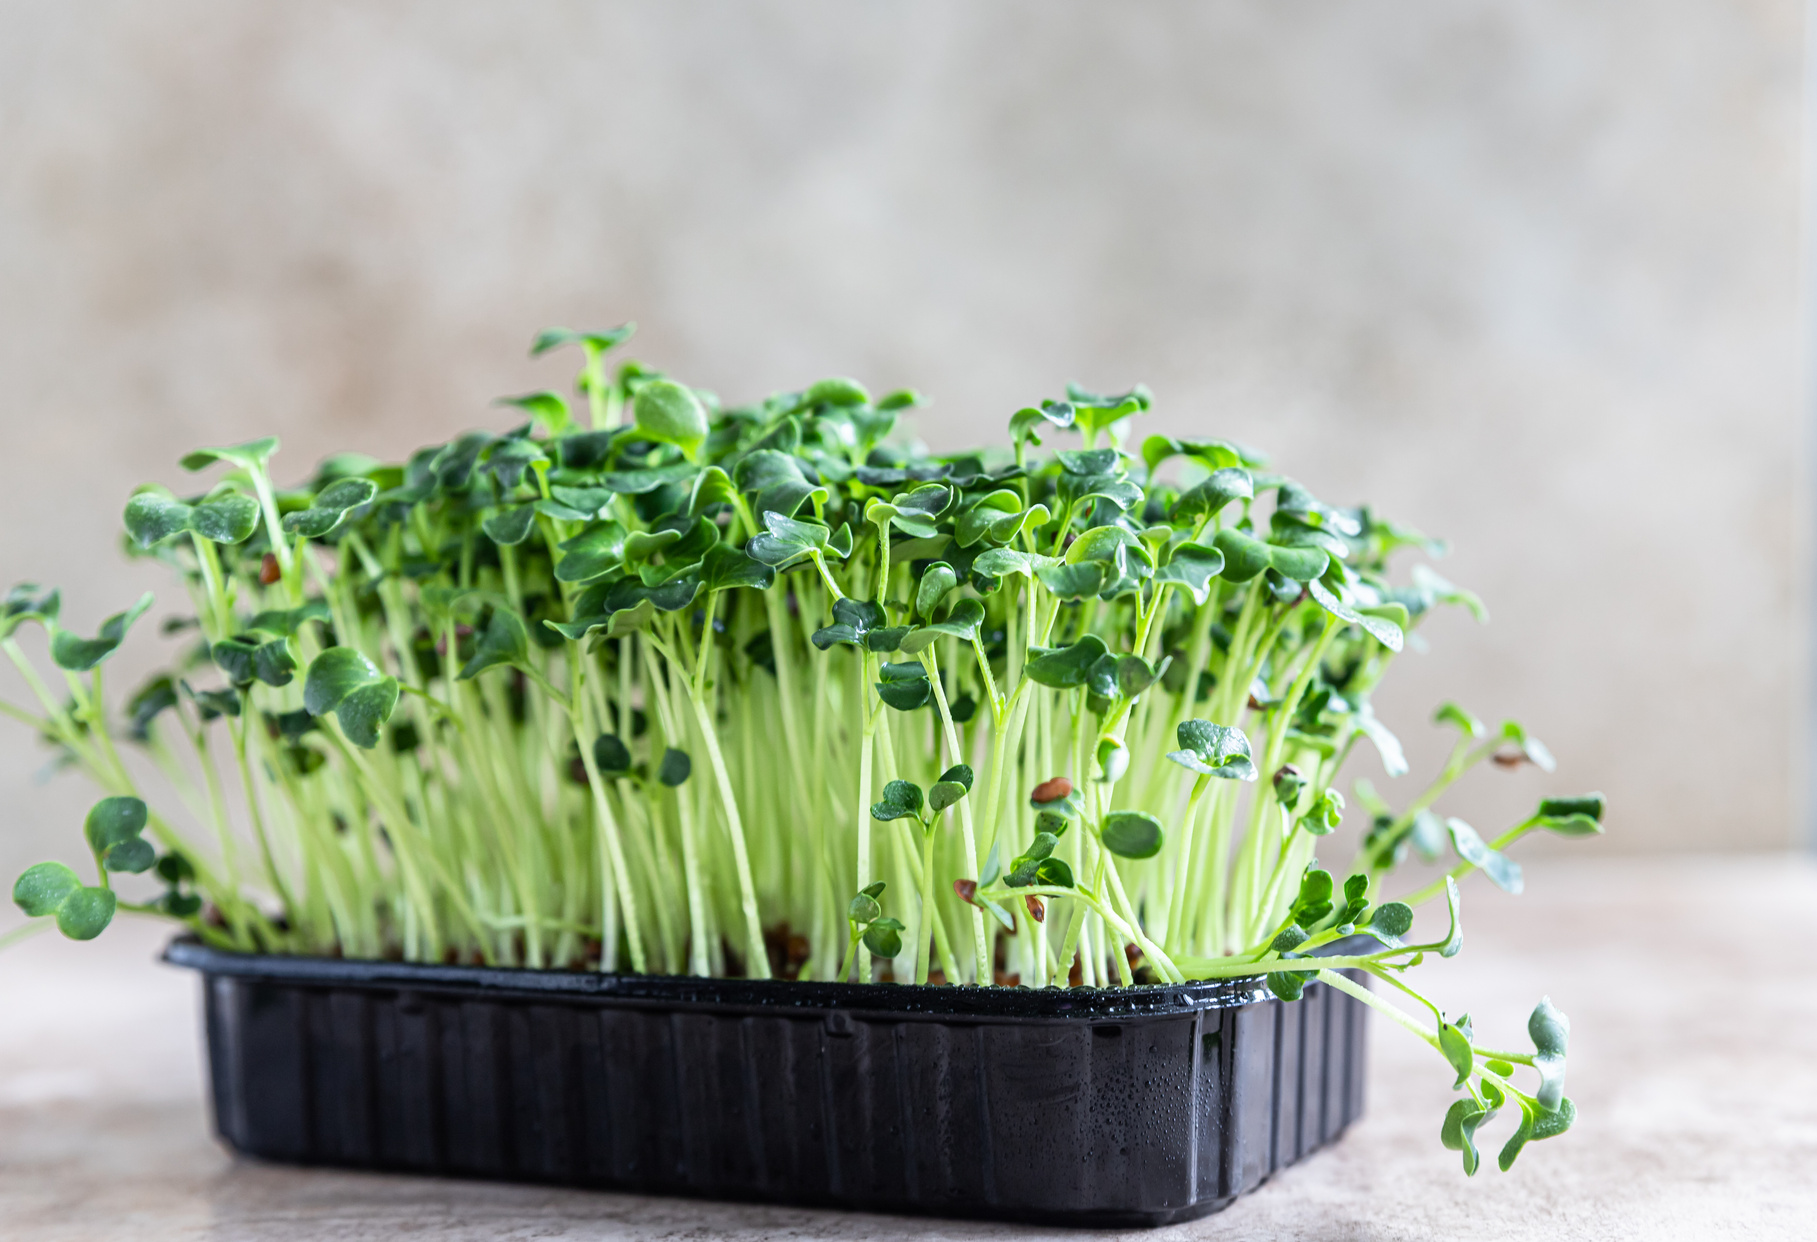 Daikon radish microgreen sprouts in a black tray. Organic microgreen for healthy eating. Concept of vegan food. Growing at home.